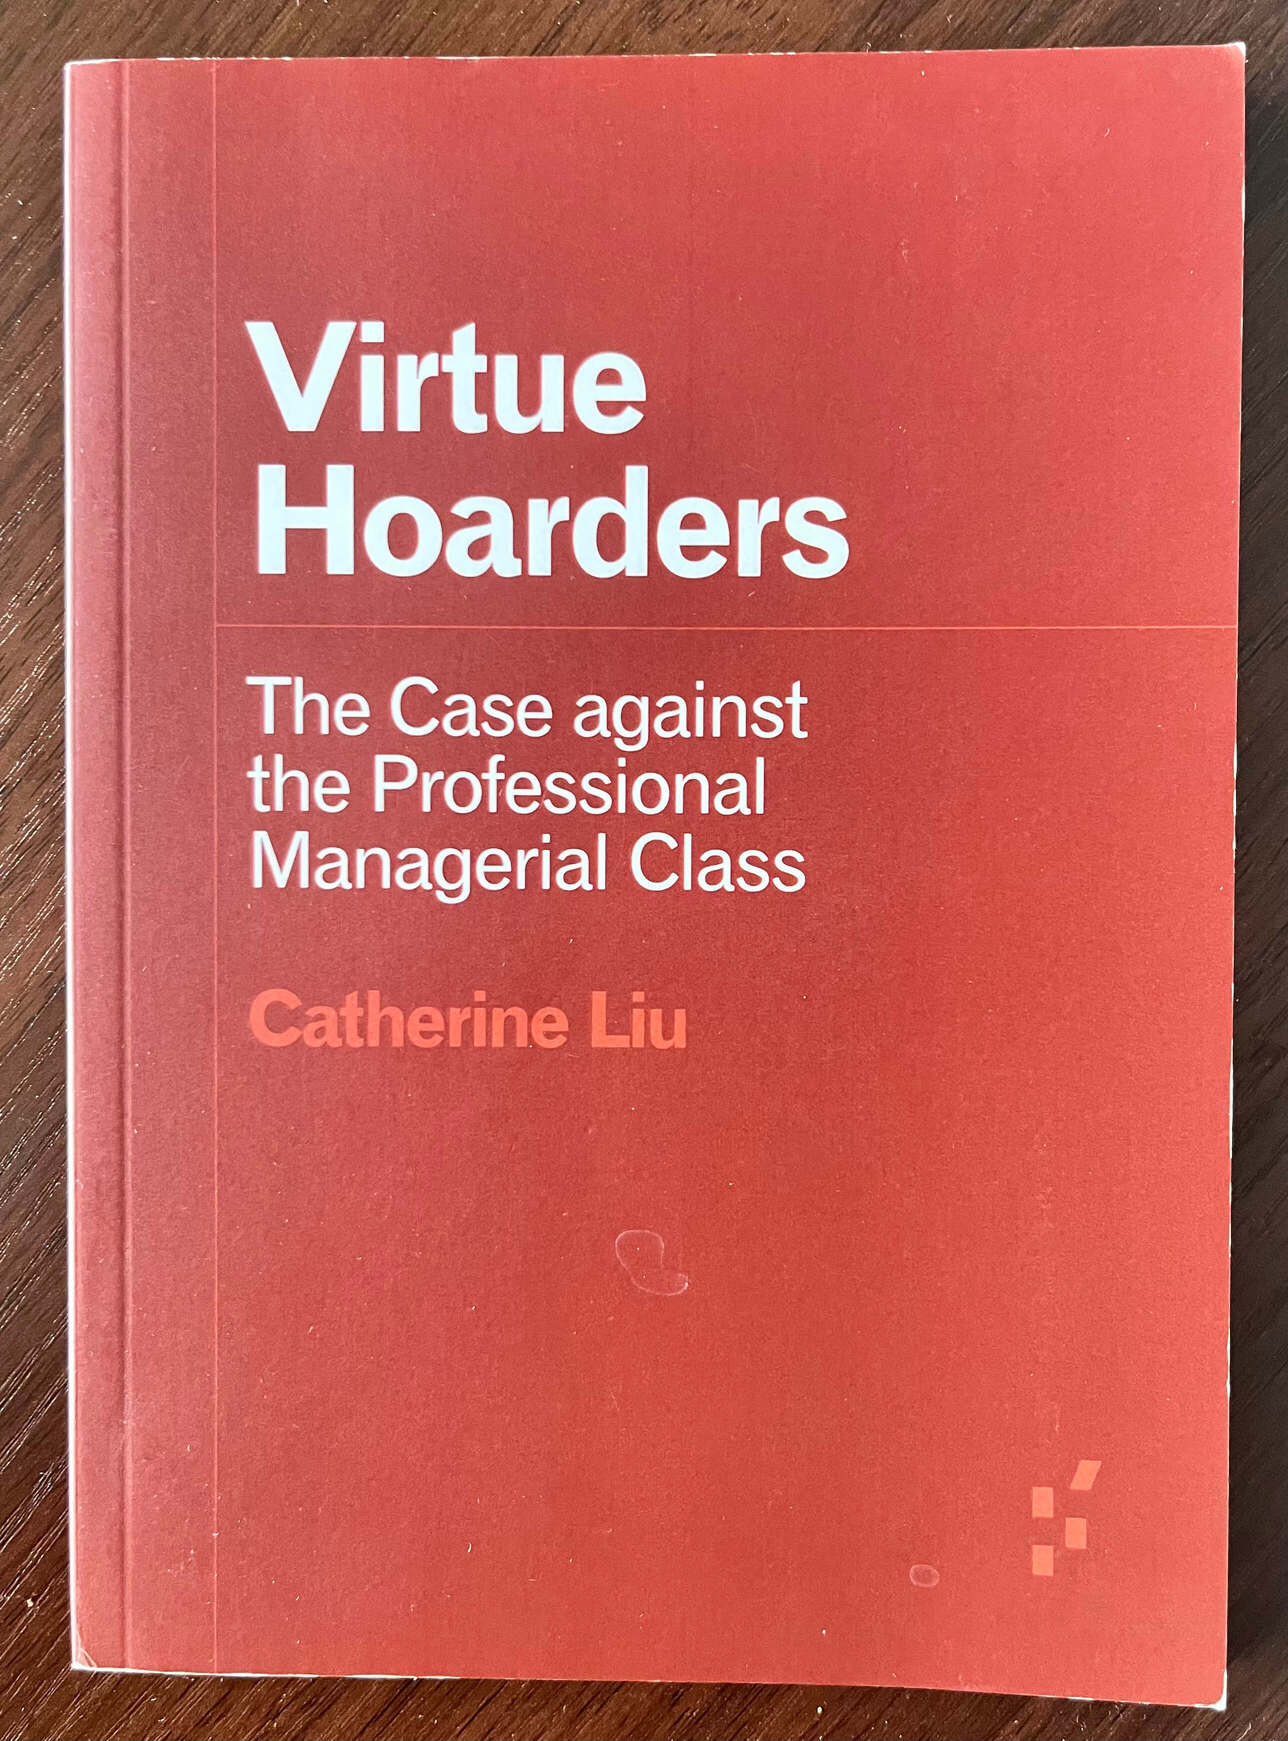 “Virtue Hoarders: The Case against the Professional Managerial Class” by Catherine Liu.